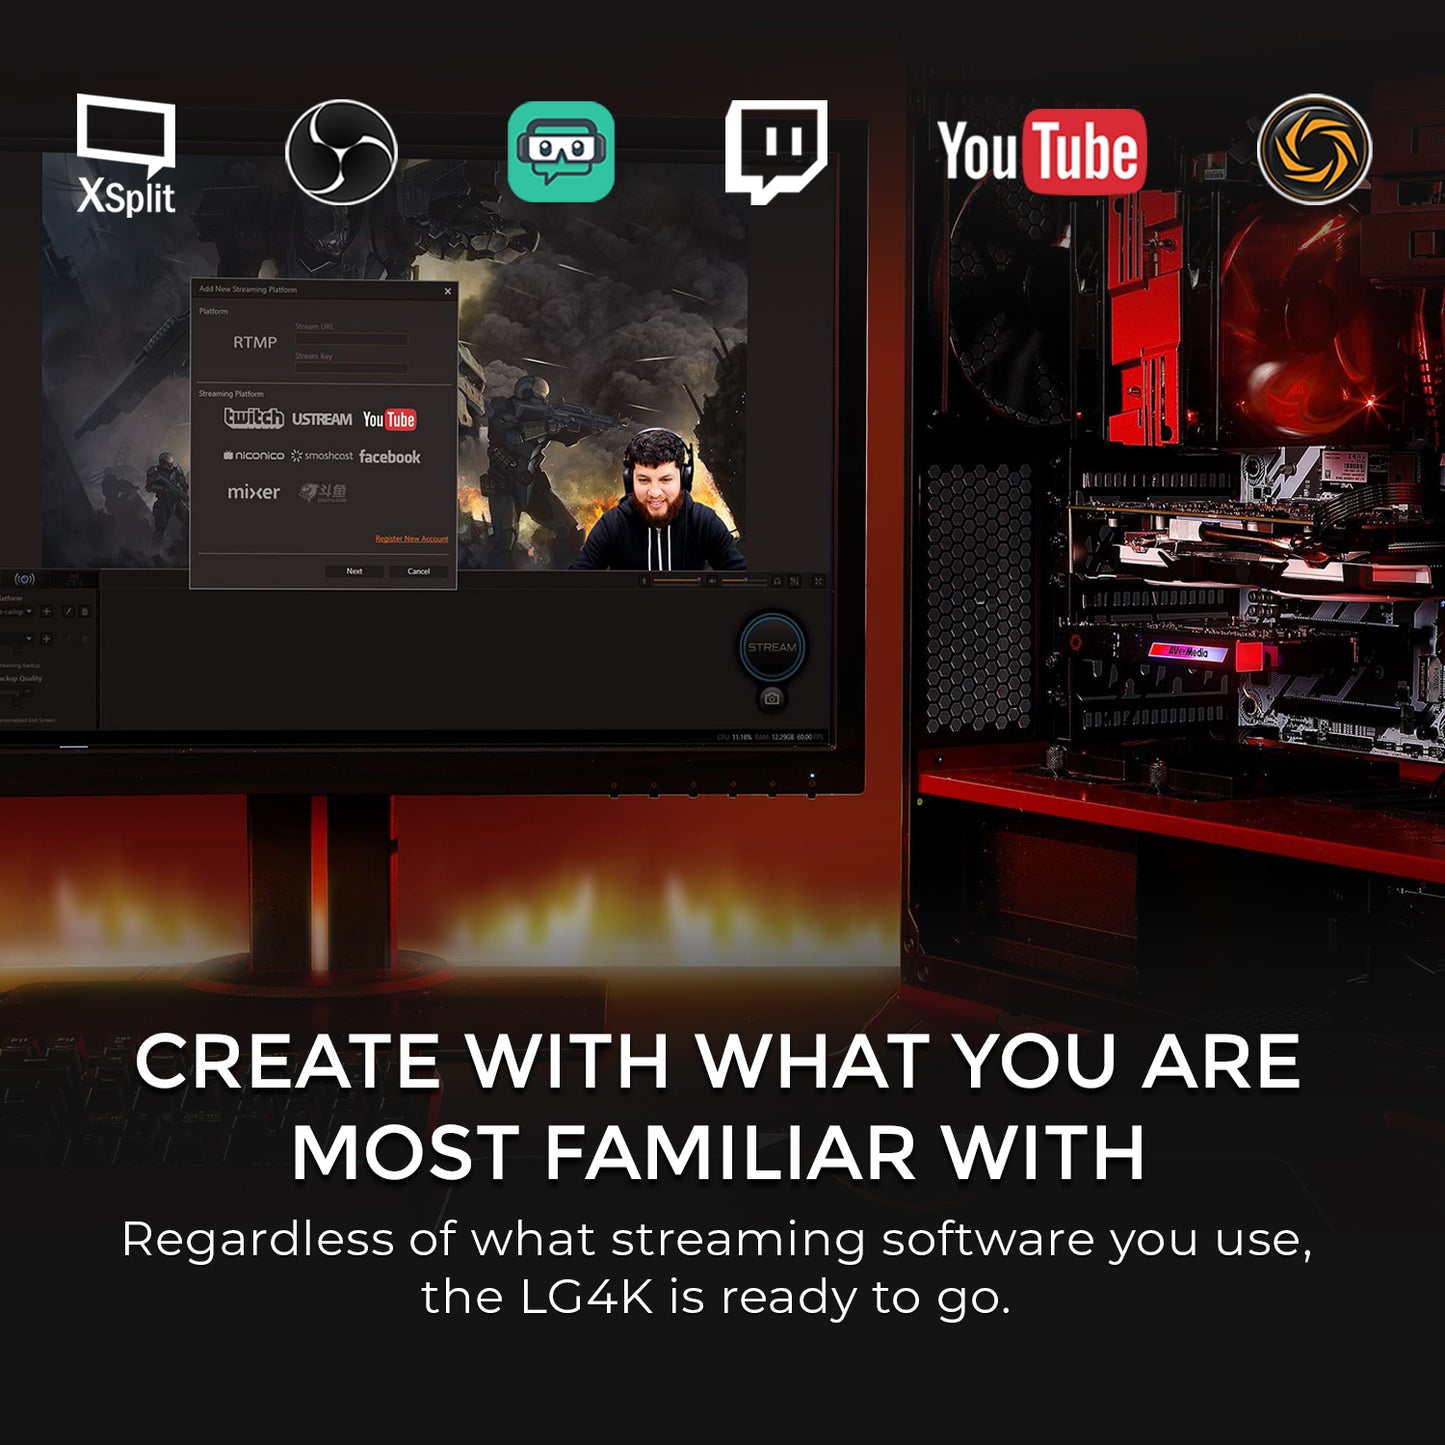 Capture card being compatible with streaming platforms